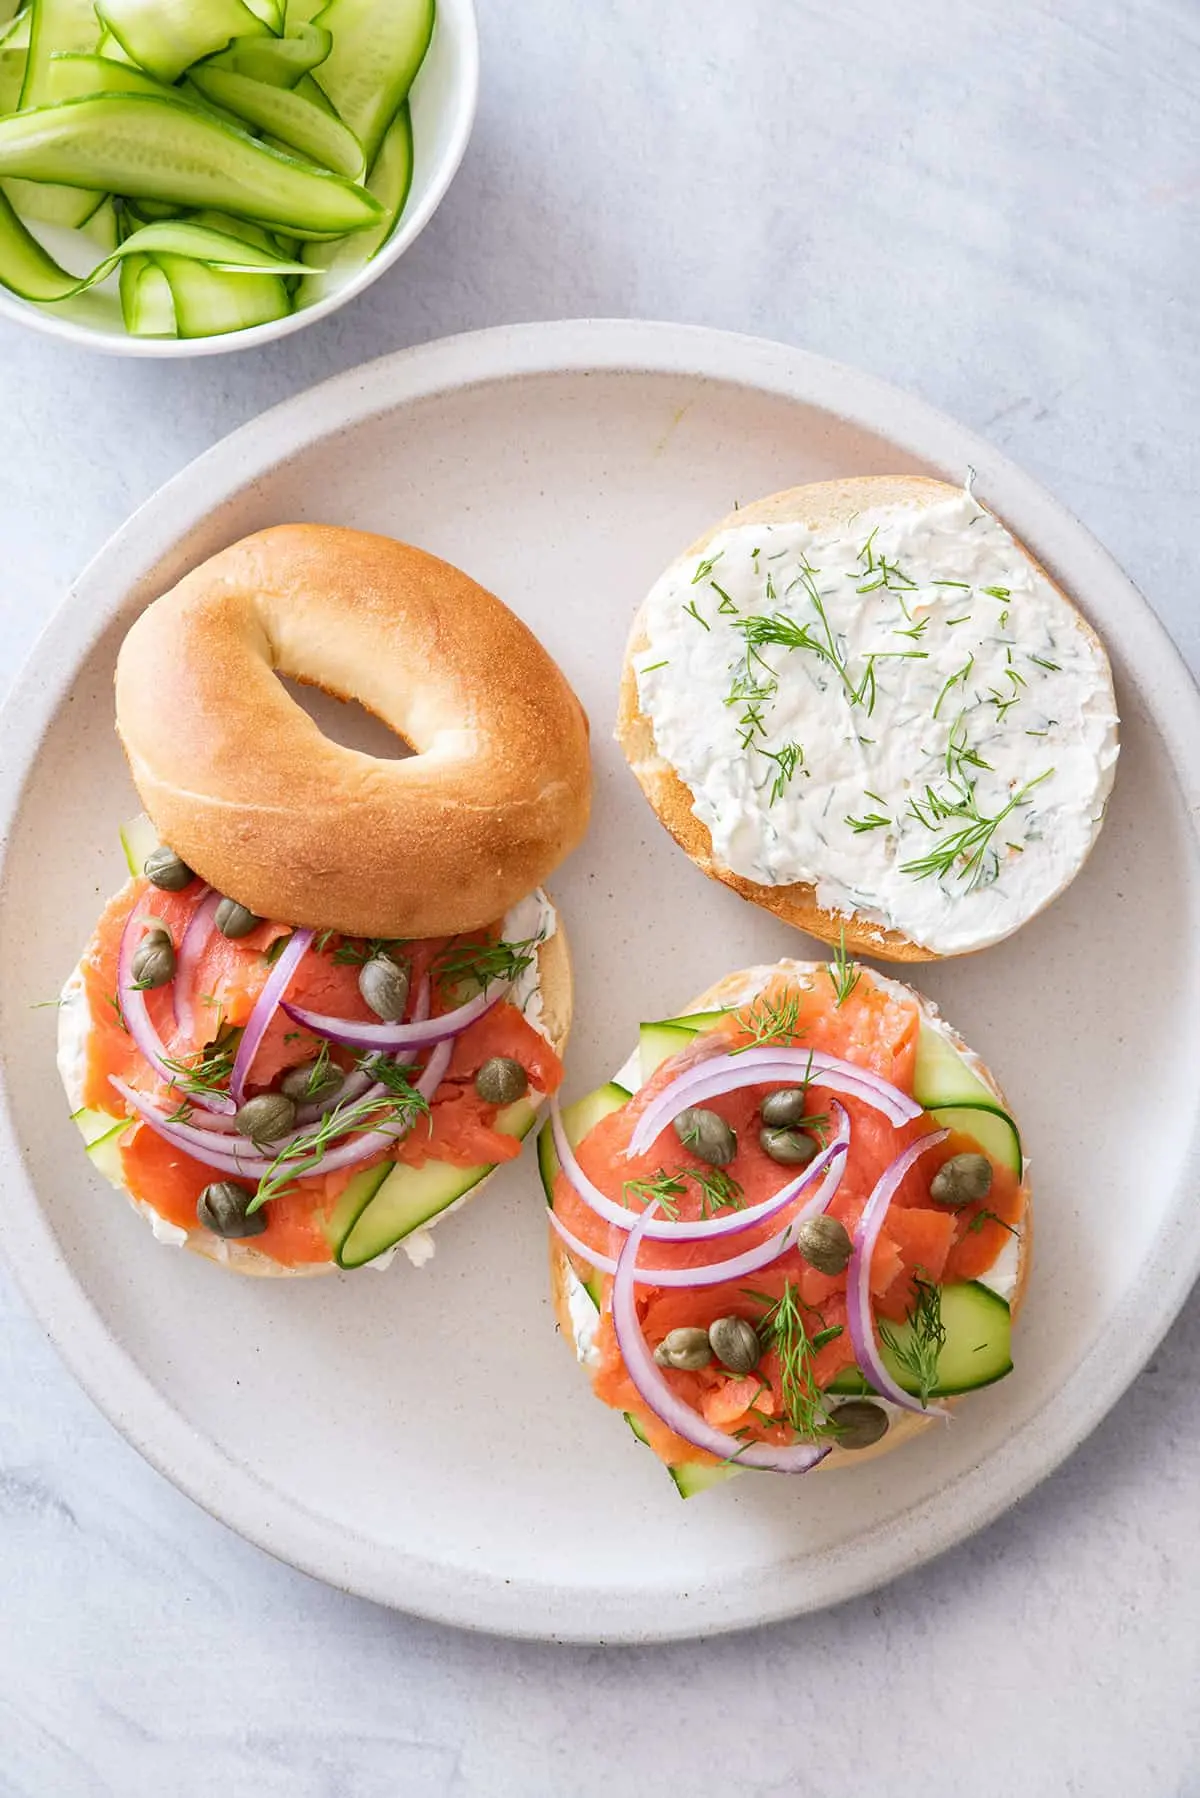 How Many Calories In A Smoked Salmon Bagel Sandwich 1.webp